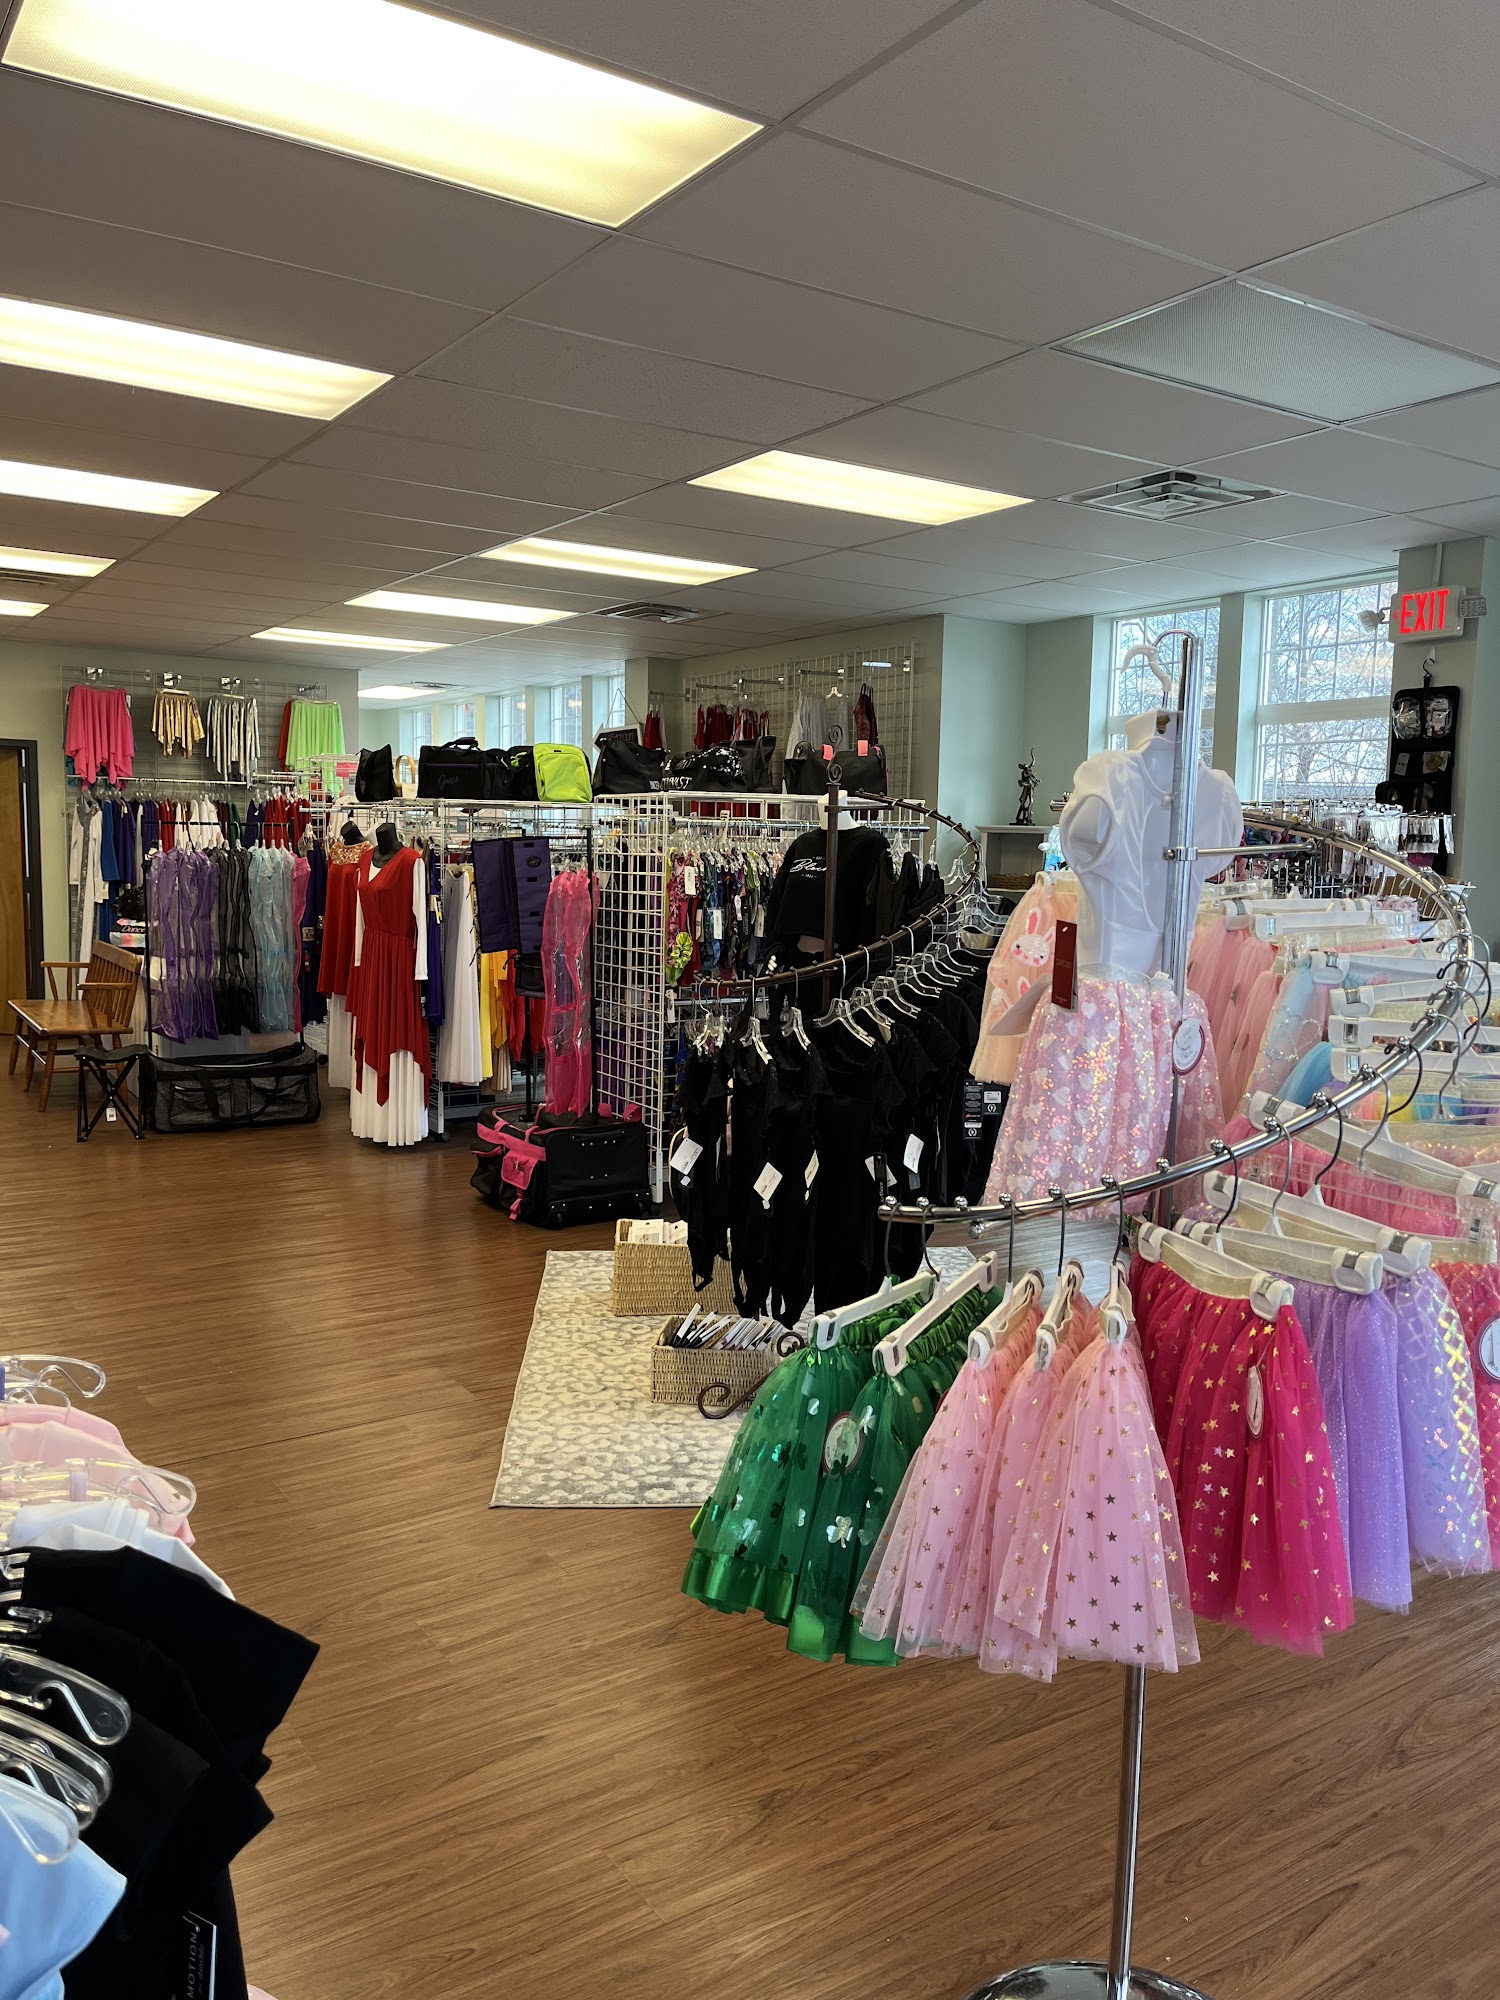 Motions Dance and Fitness Shoppe